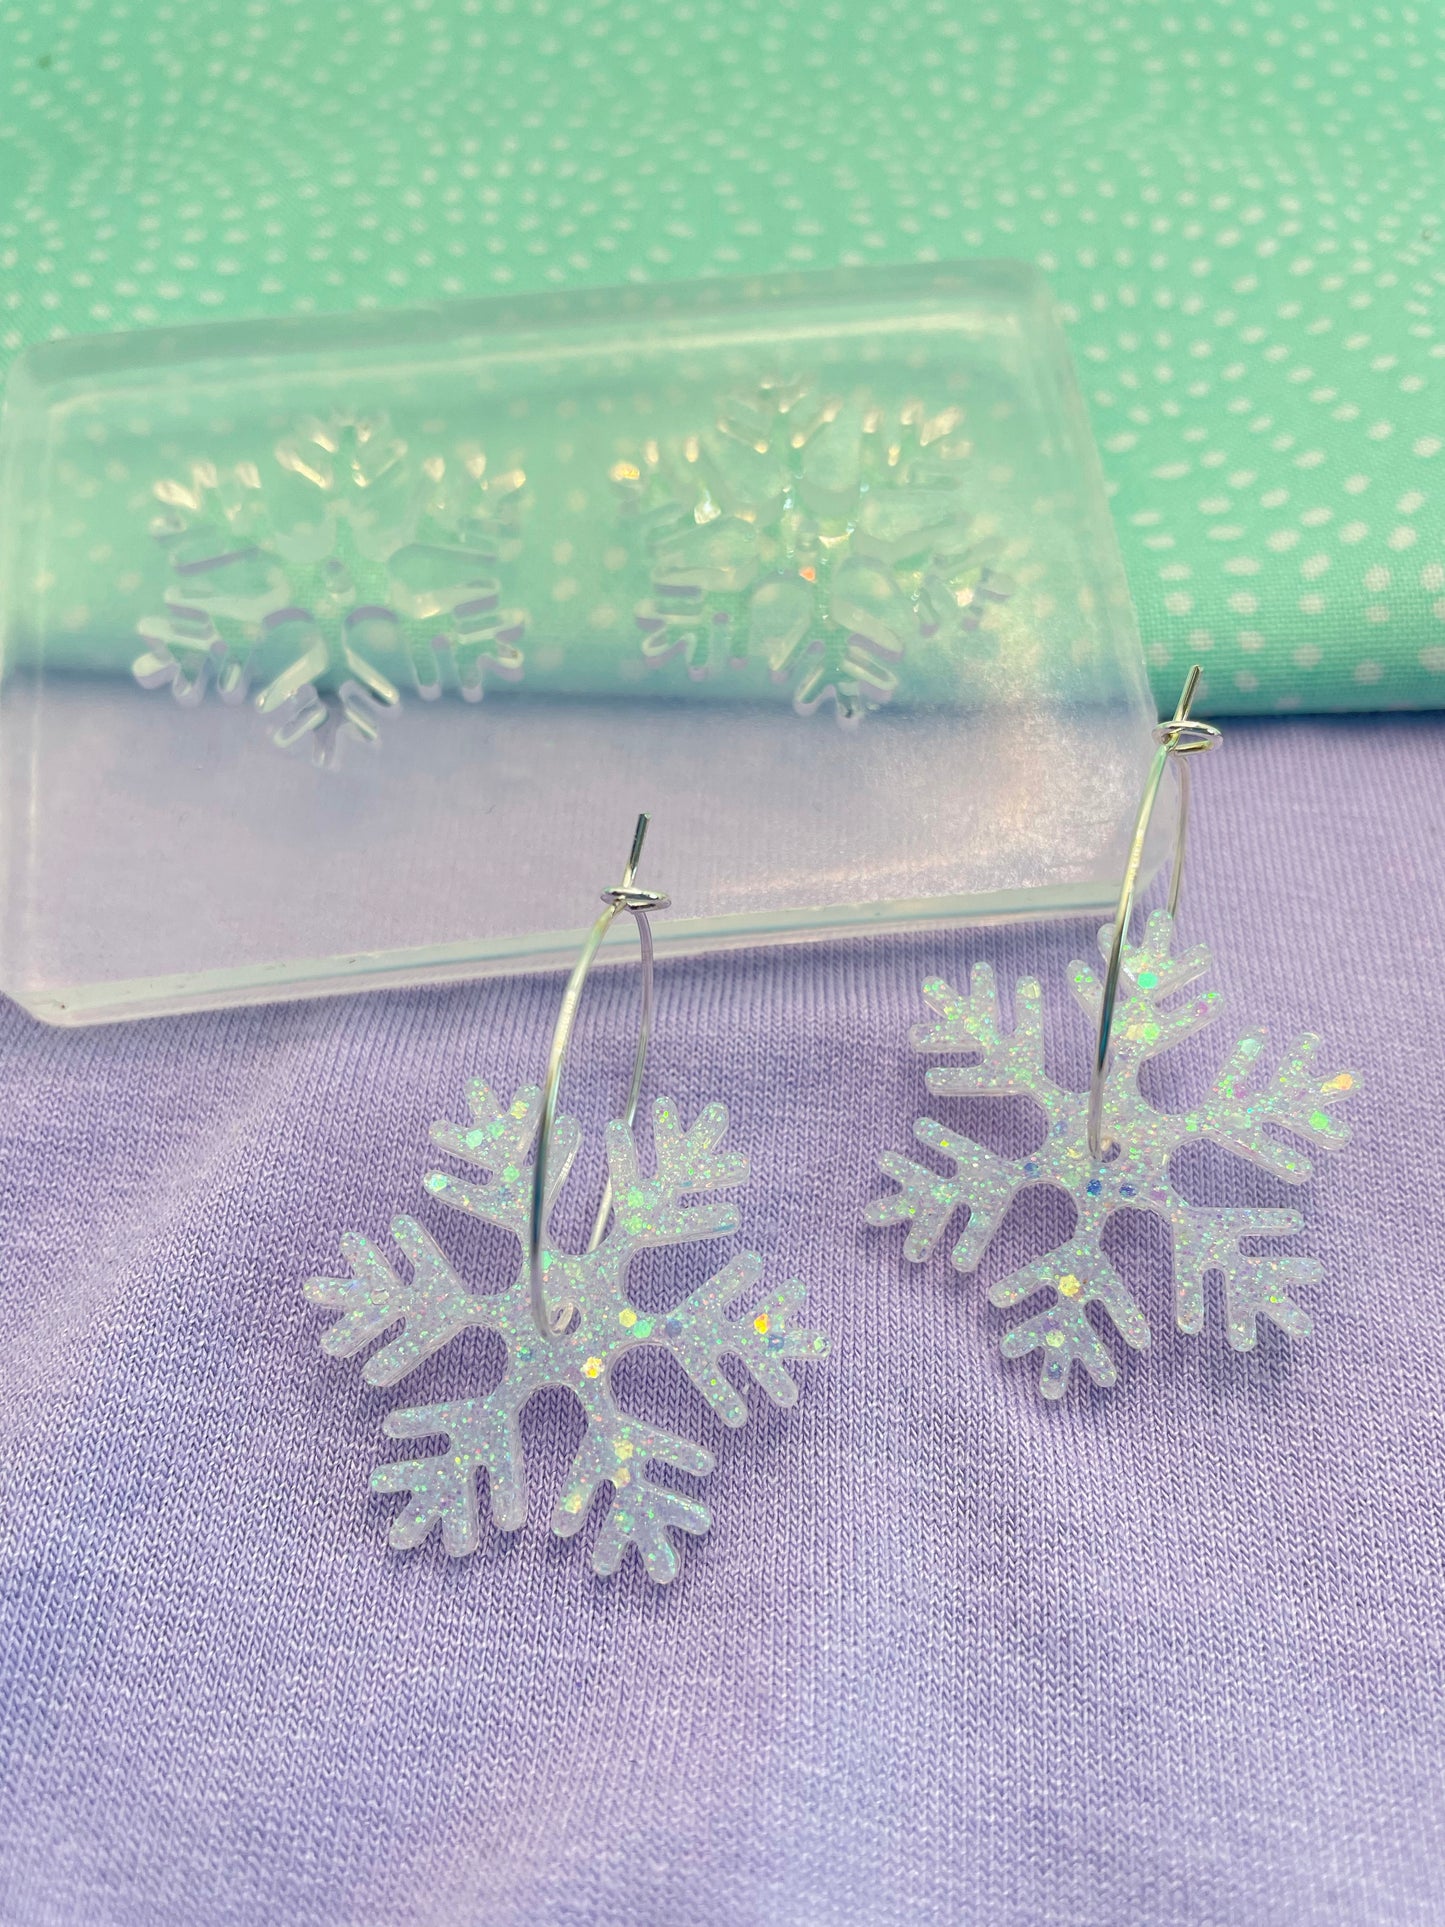 3cm Snowflake Spinner Earring Mold Pre-drilled holes